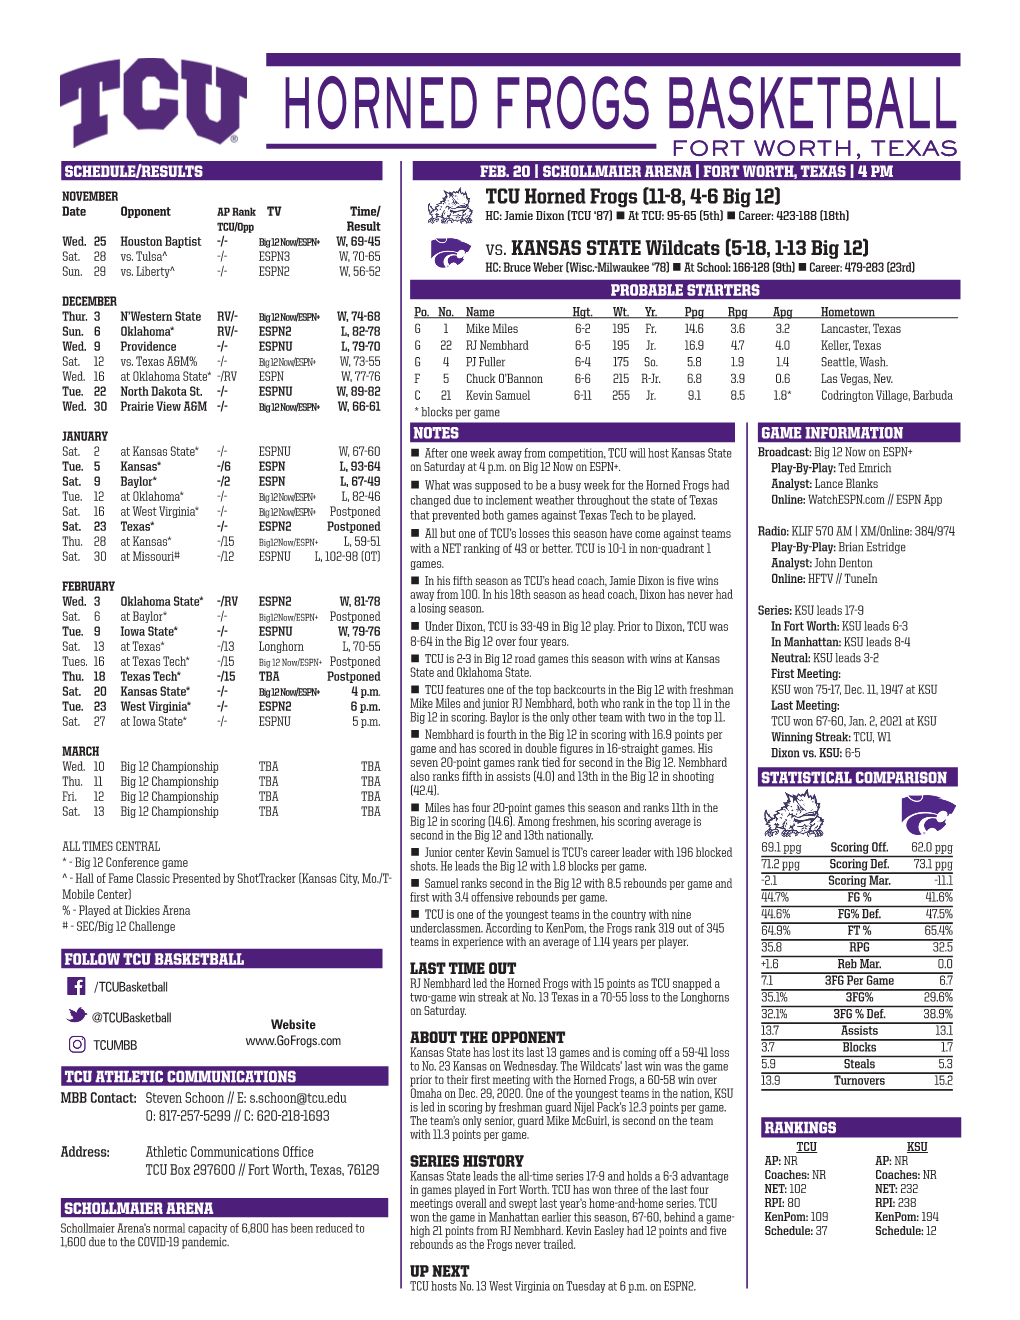 Horned Frogs Basketball Fort Worth, Texas Schedule/Results Feb